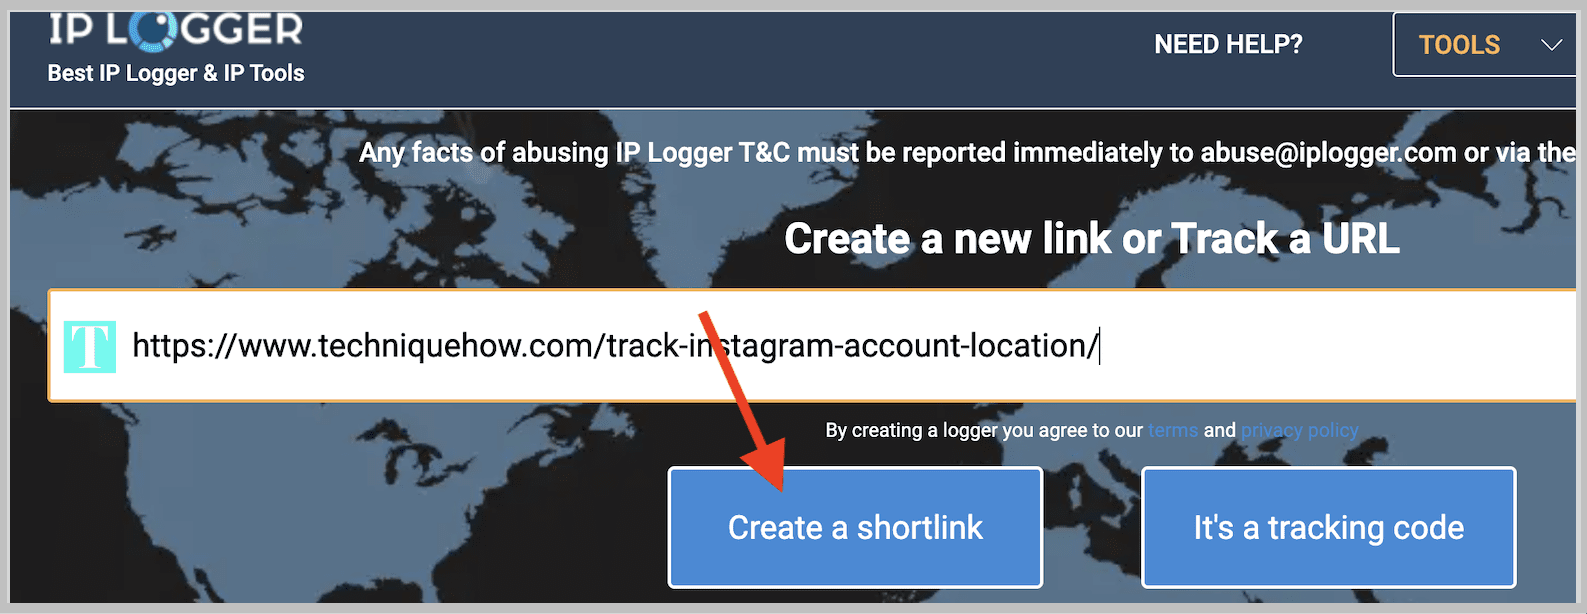 Click on create a short link